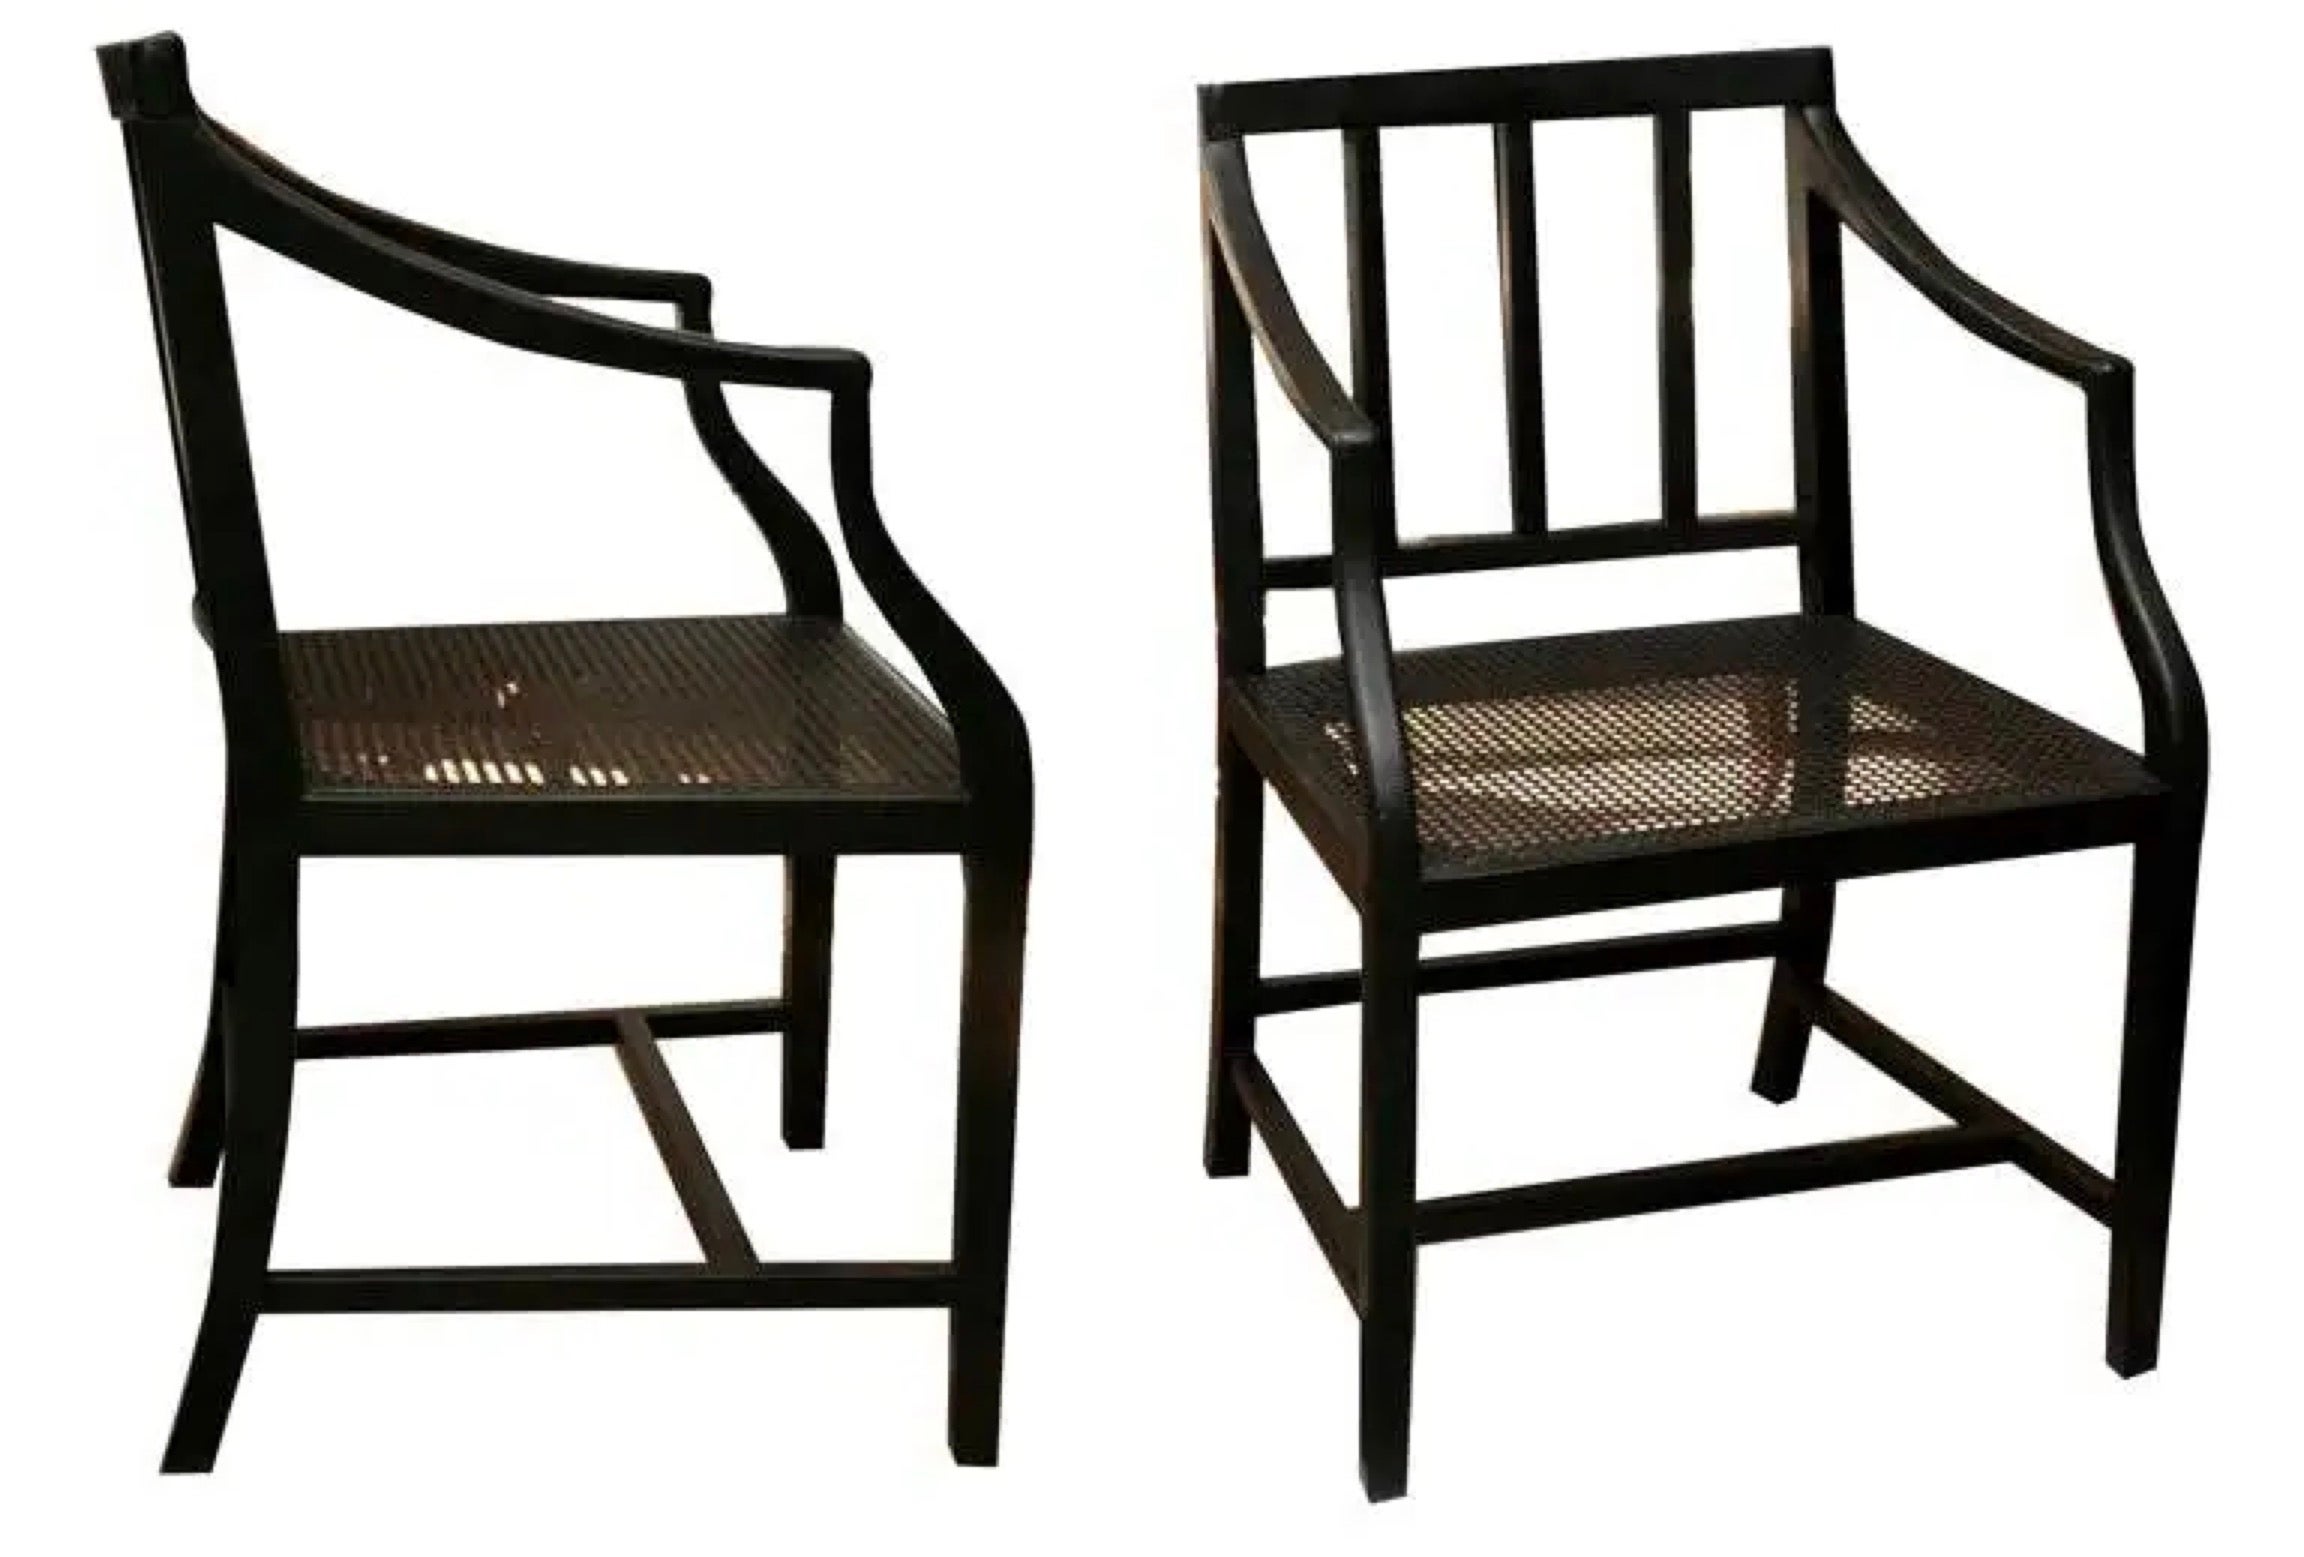 Made to order, the chairs were originally made by us for the movie 